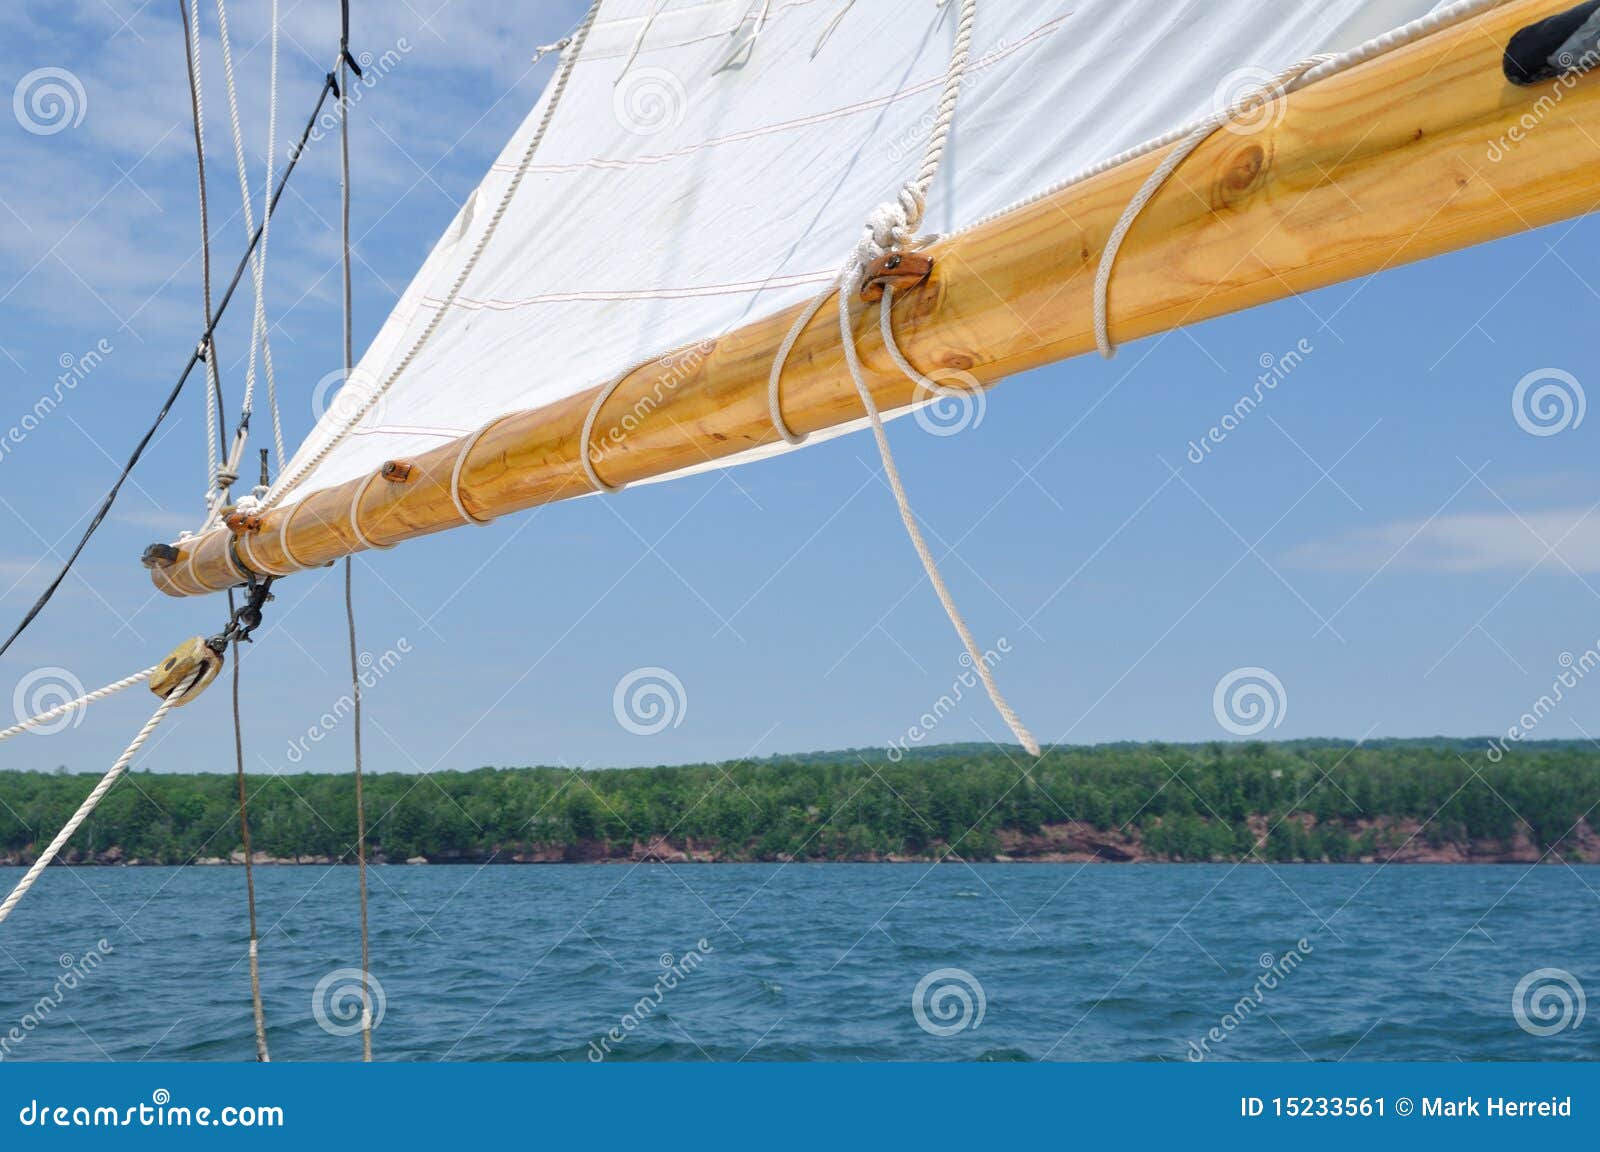 what does the boom do on a sailboat